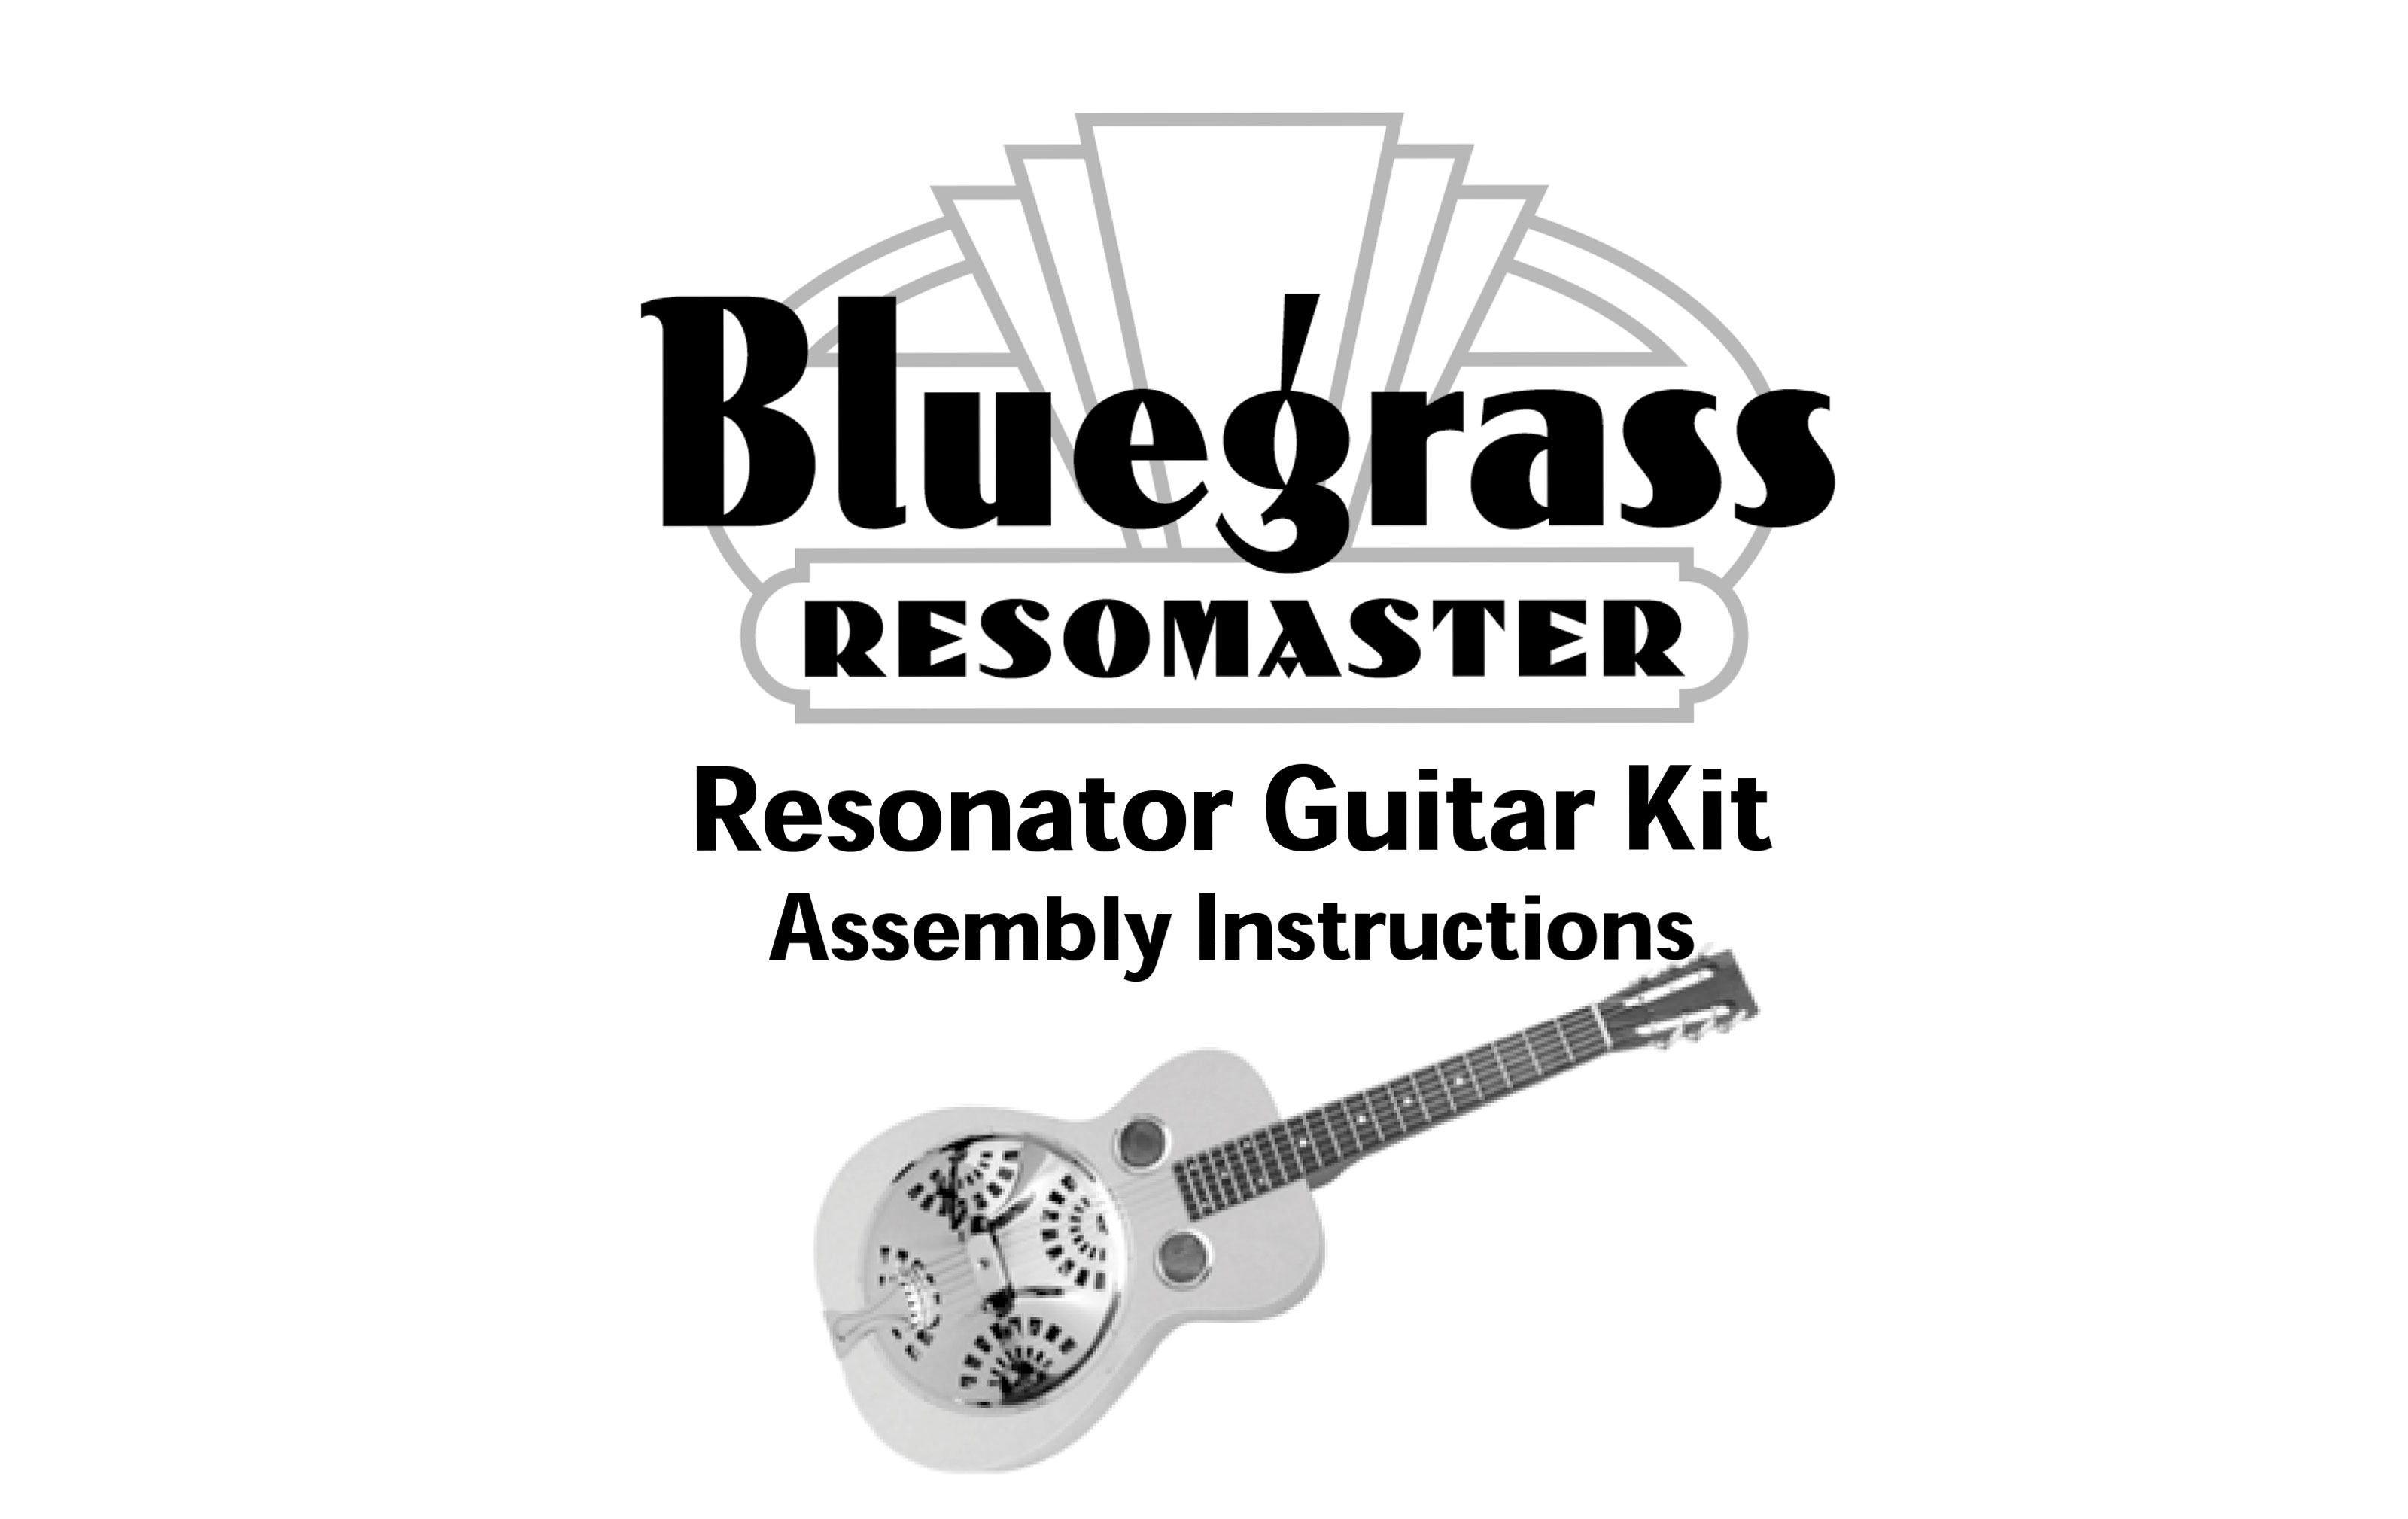 https://www.stewmac.com/globalassets/video-and-ideas/online-resources/building-instruments/bluegrass-resomaster-assembly/i-bluegrass_resomast-tileimage.jpg?hash=637613108870000000